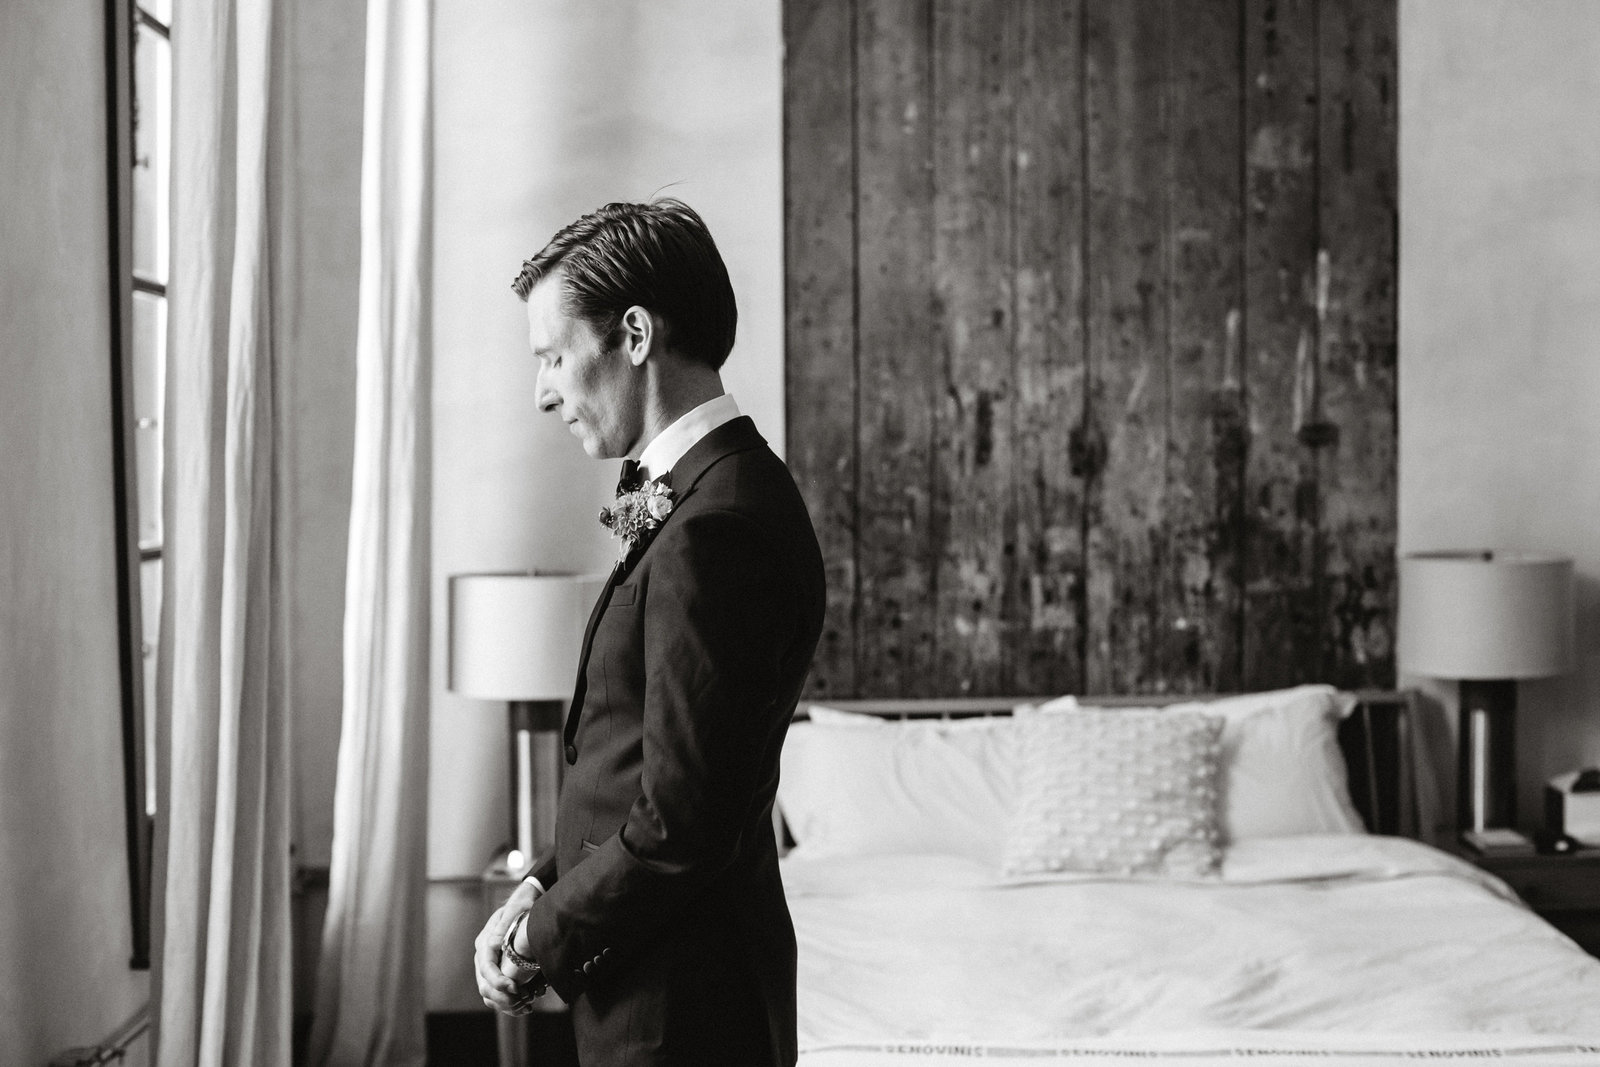 Powerful shot of the groom moments before seeing his bride for the first time at Lokal Hotel.